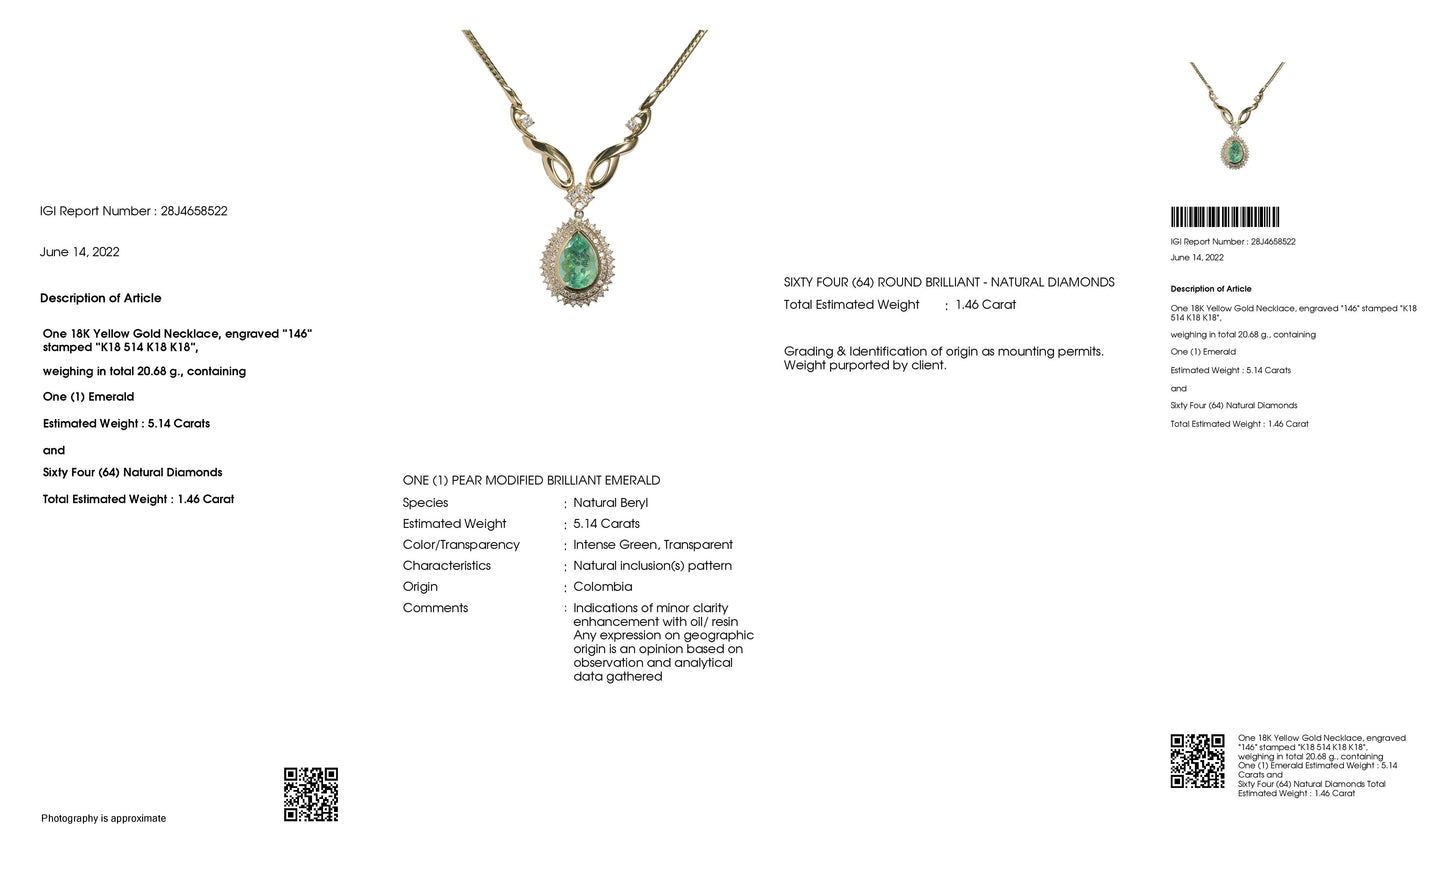 5.14ct NATURAL COLOMBIA EMERALD accented by 1.46ct NATURAL DIAMONDS set with 18K Yellow Gold Necklace